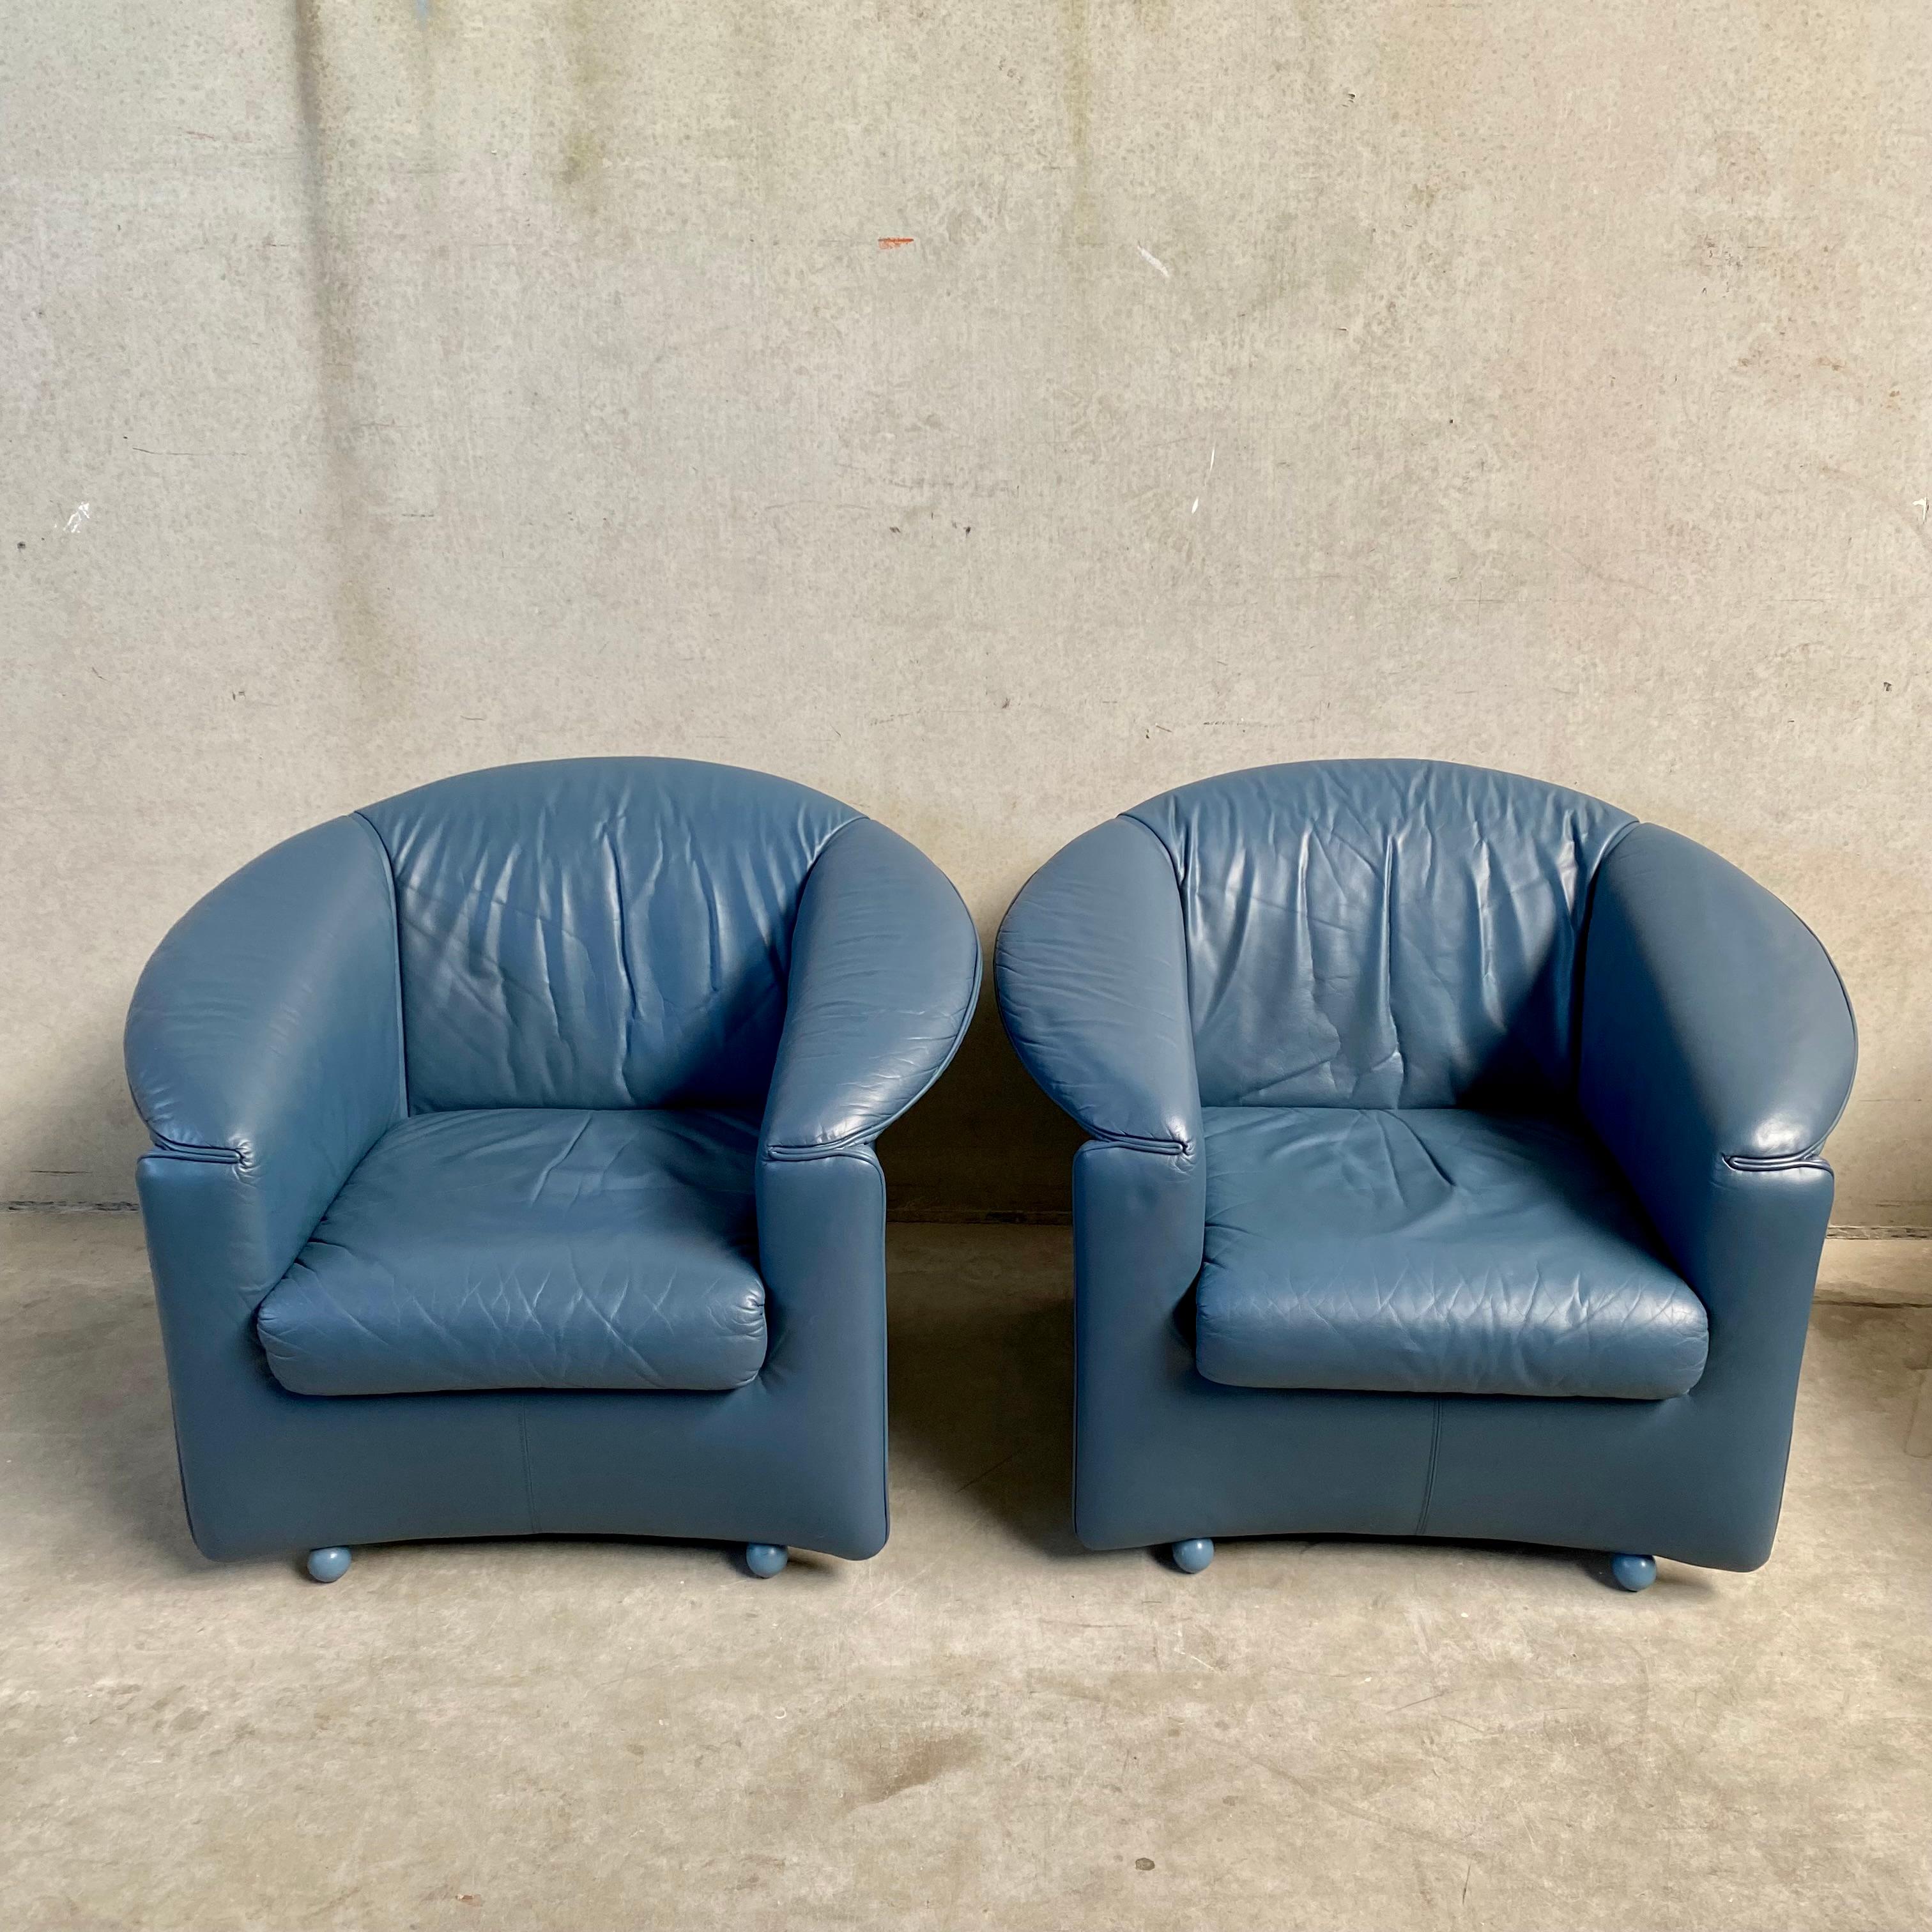 Set of 2 Vintage Leather Arm Chairs by Paolo Piva for Wittmann, Austria 1980s For Sale 14